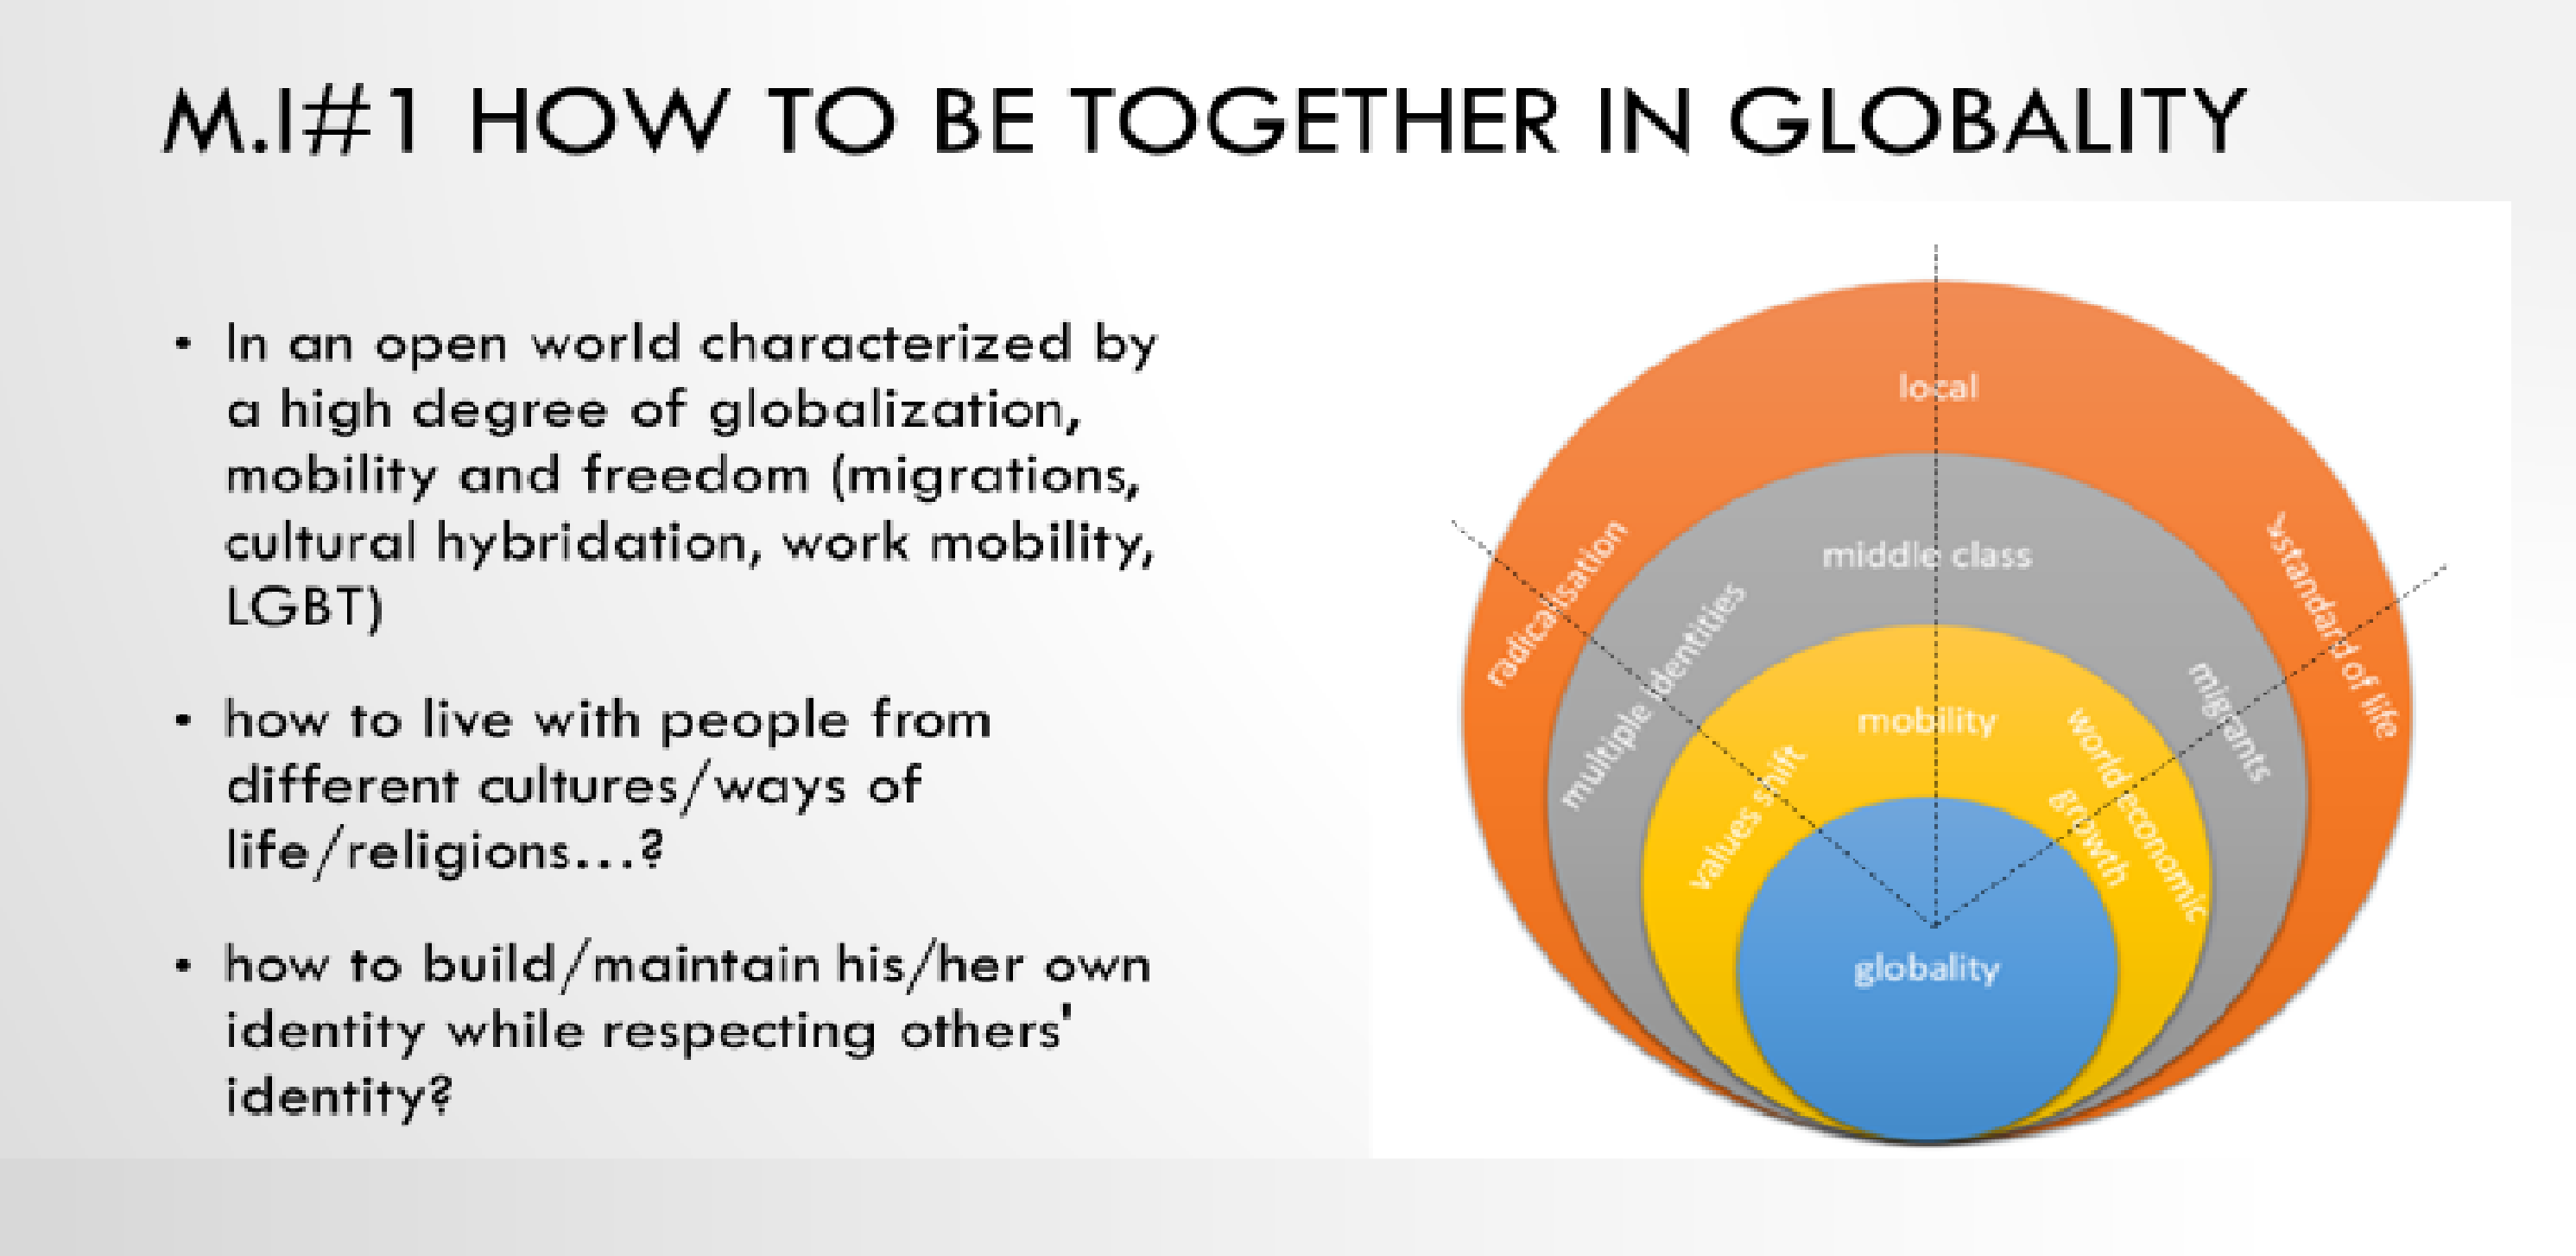 Meta-Issue 1: How to be together in the era of globality